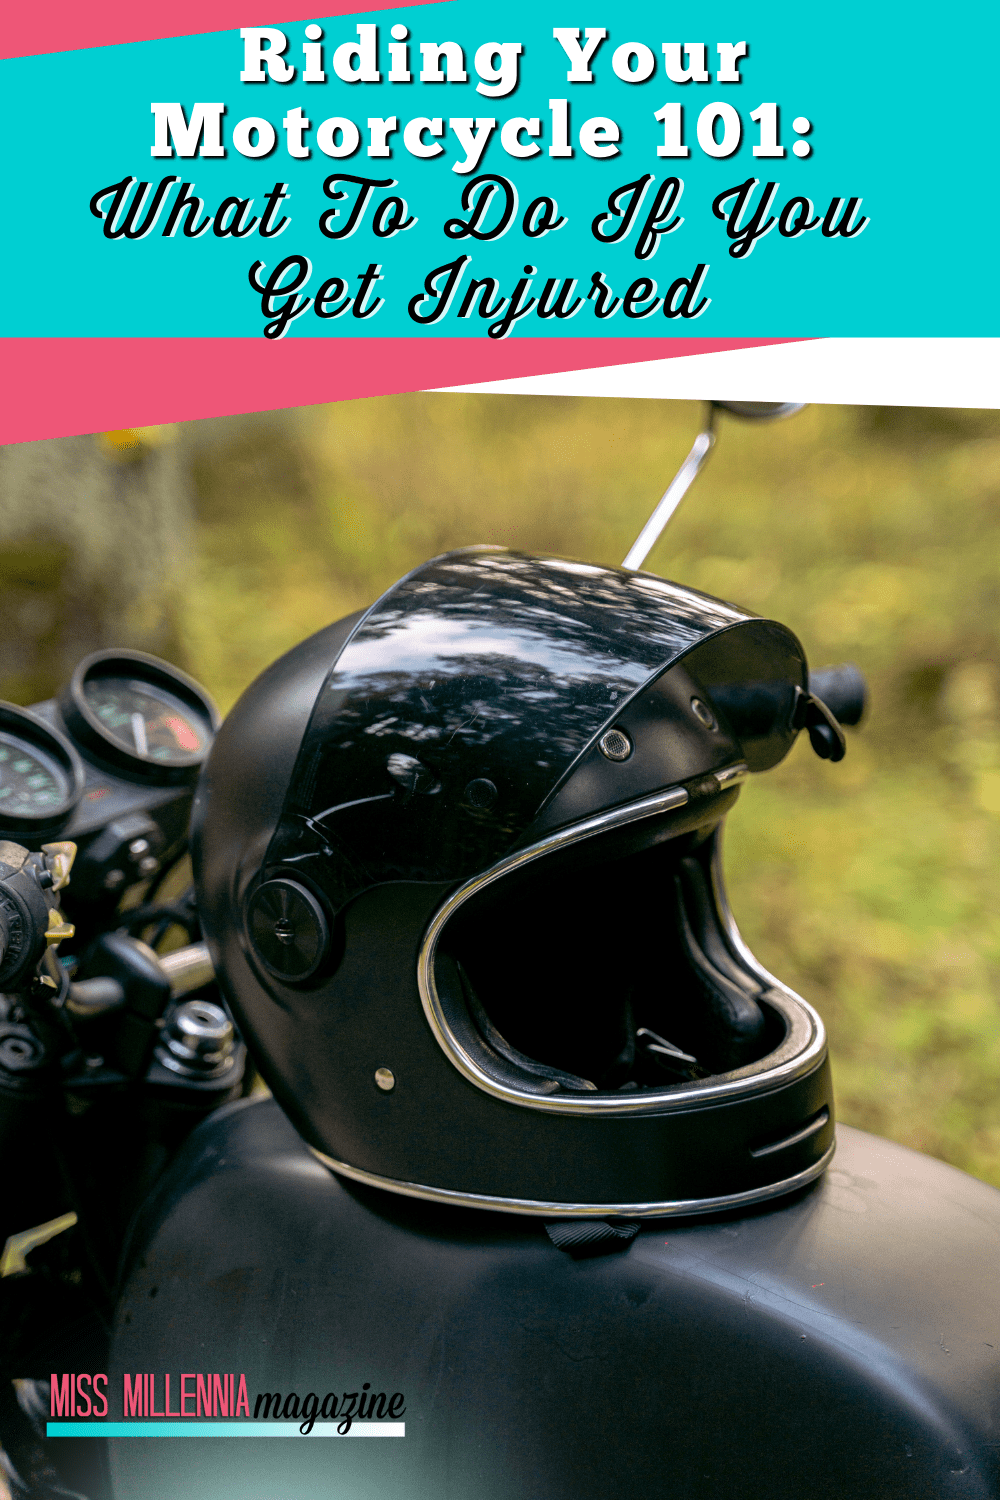 Riding Your Motorcycle 101: What To Do If You Get Injured